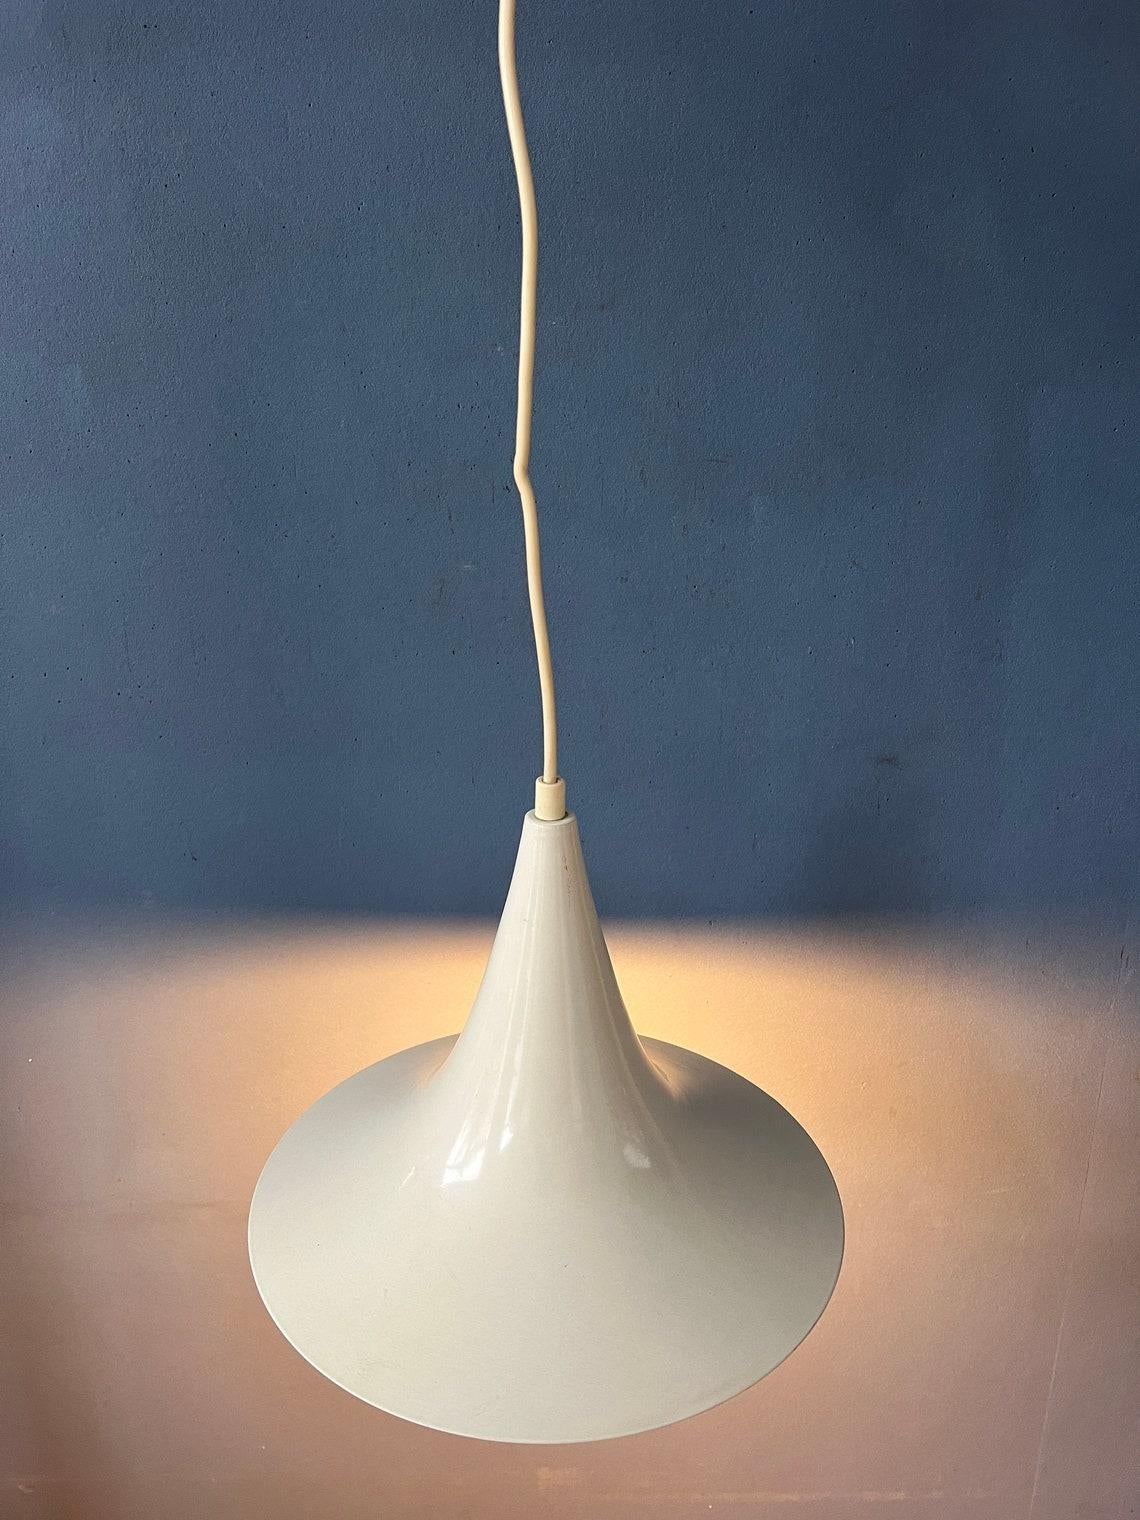 Small white mid century space age witch hat pendant lamp. The shade is made out of metal and has a white/beige lacquer. The lamp requires an E27 (E26) lightbulb.
2 pieces available

Additional information:
Materials: Plastic
Period: